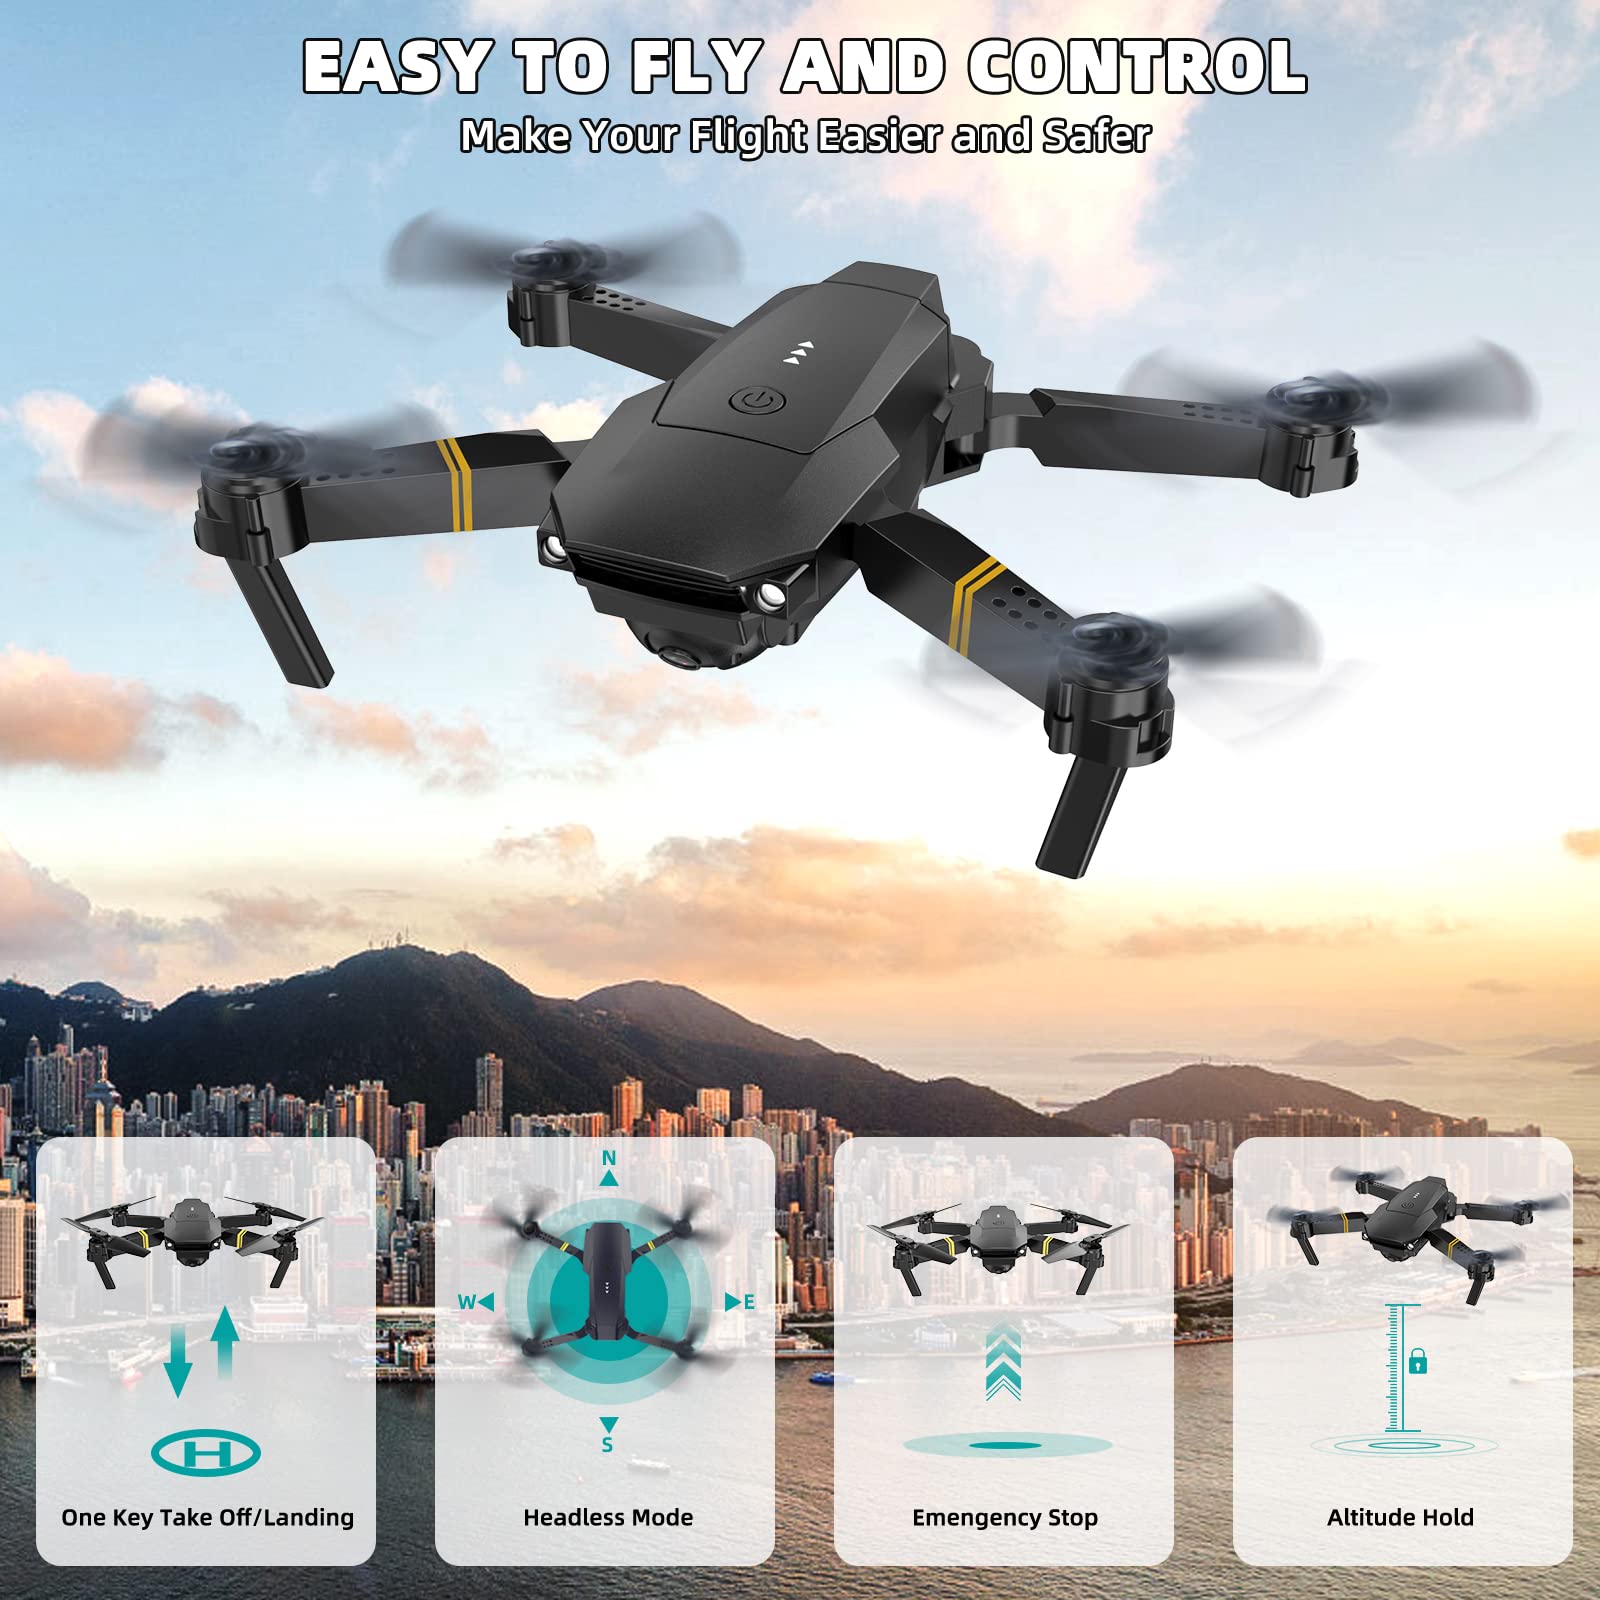 Drones for Adults with Cameras 4K, Drone with Camera 4k 1080 Foldable Drones for kids RC Quadcopter, Altitude Hold, FPV Drone Live Video, One Key Take Off, 3D Flip, Easter Gifts Toys for Girls/Boys, 3 Batteries